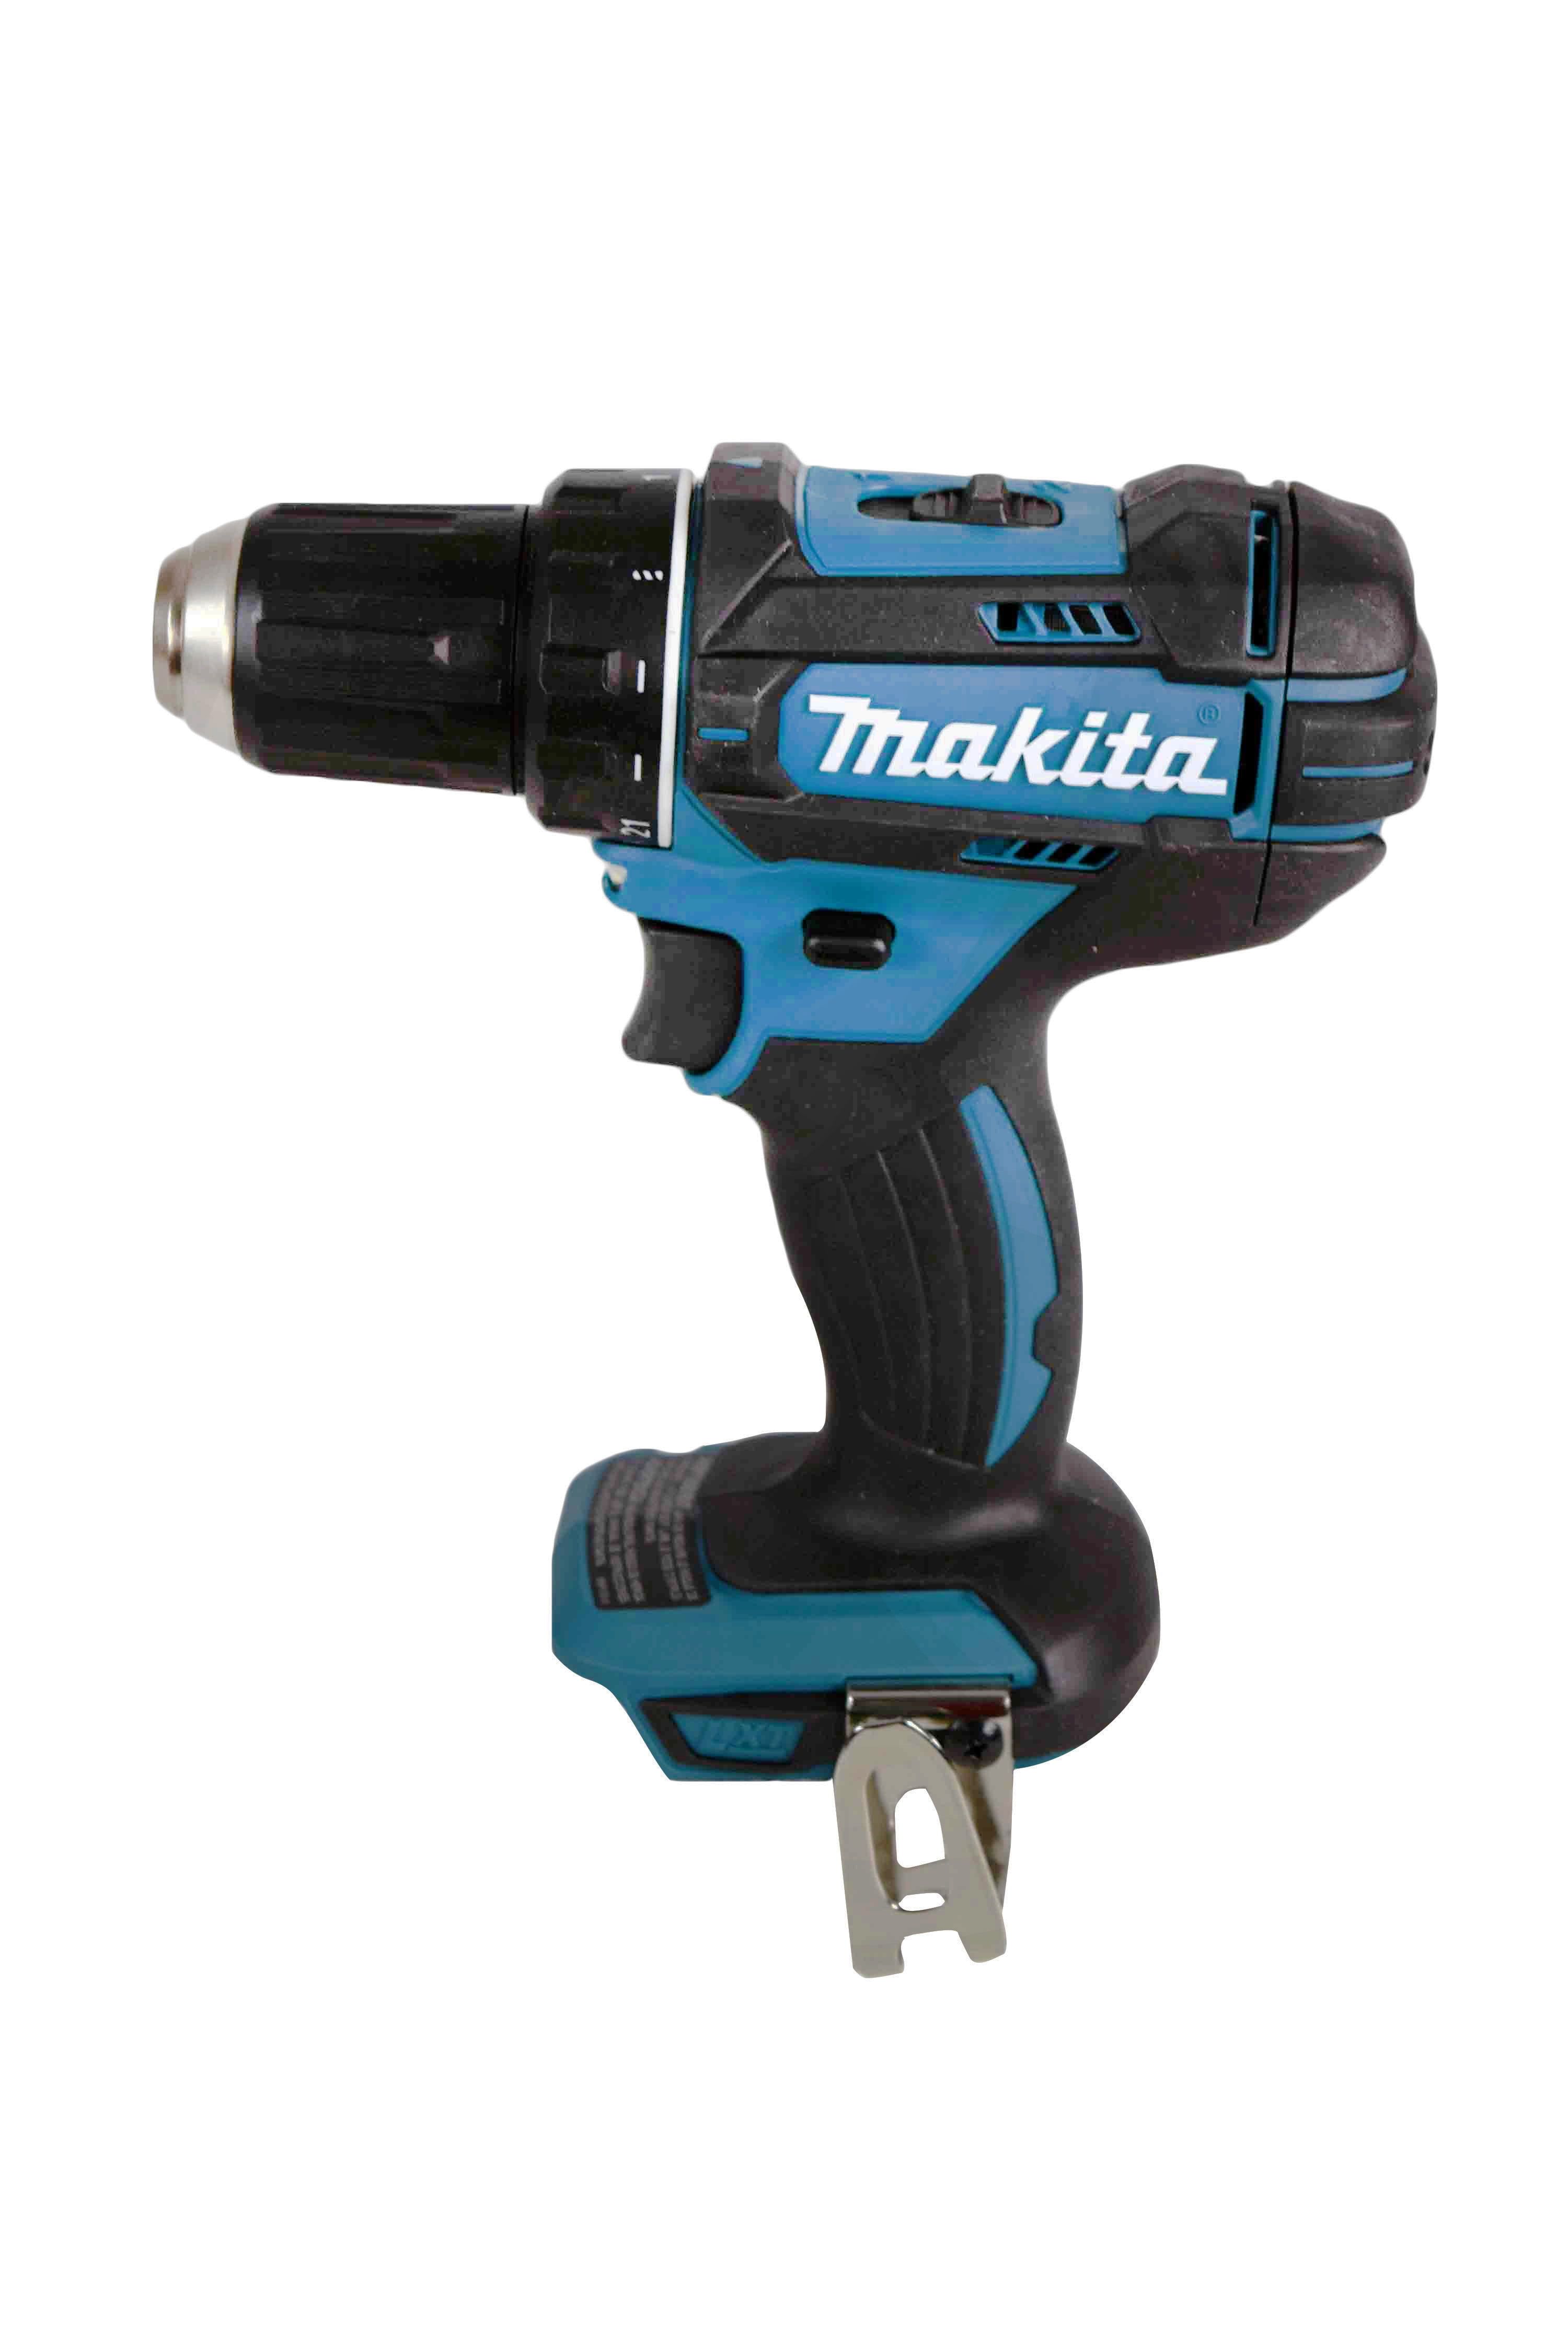 Tool Only 1/2" Makita XFD10Z 18V LXT Lithium-Ion Cordless Driver-Drill 